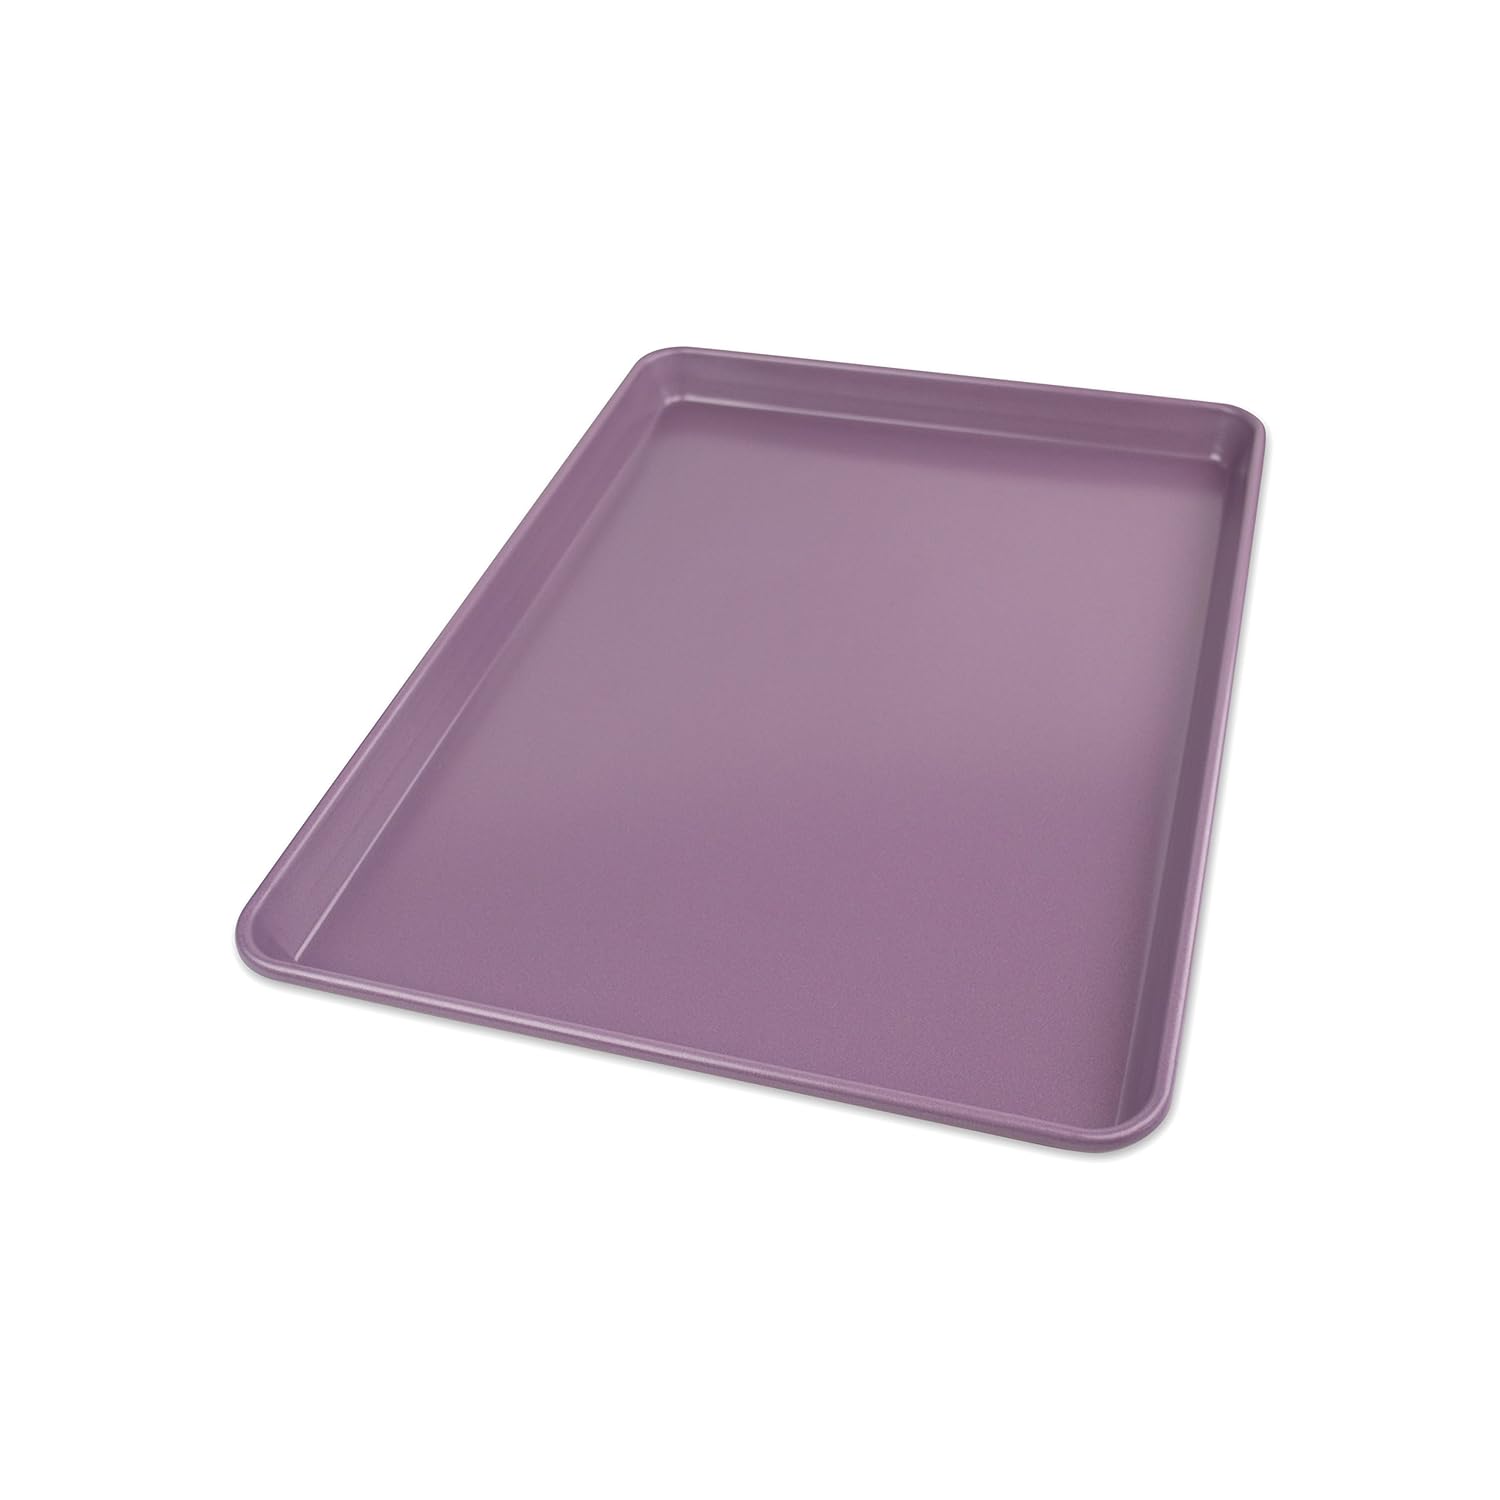 Half-Sheet Pan Commercial 17.25 by 12.25 inches